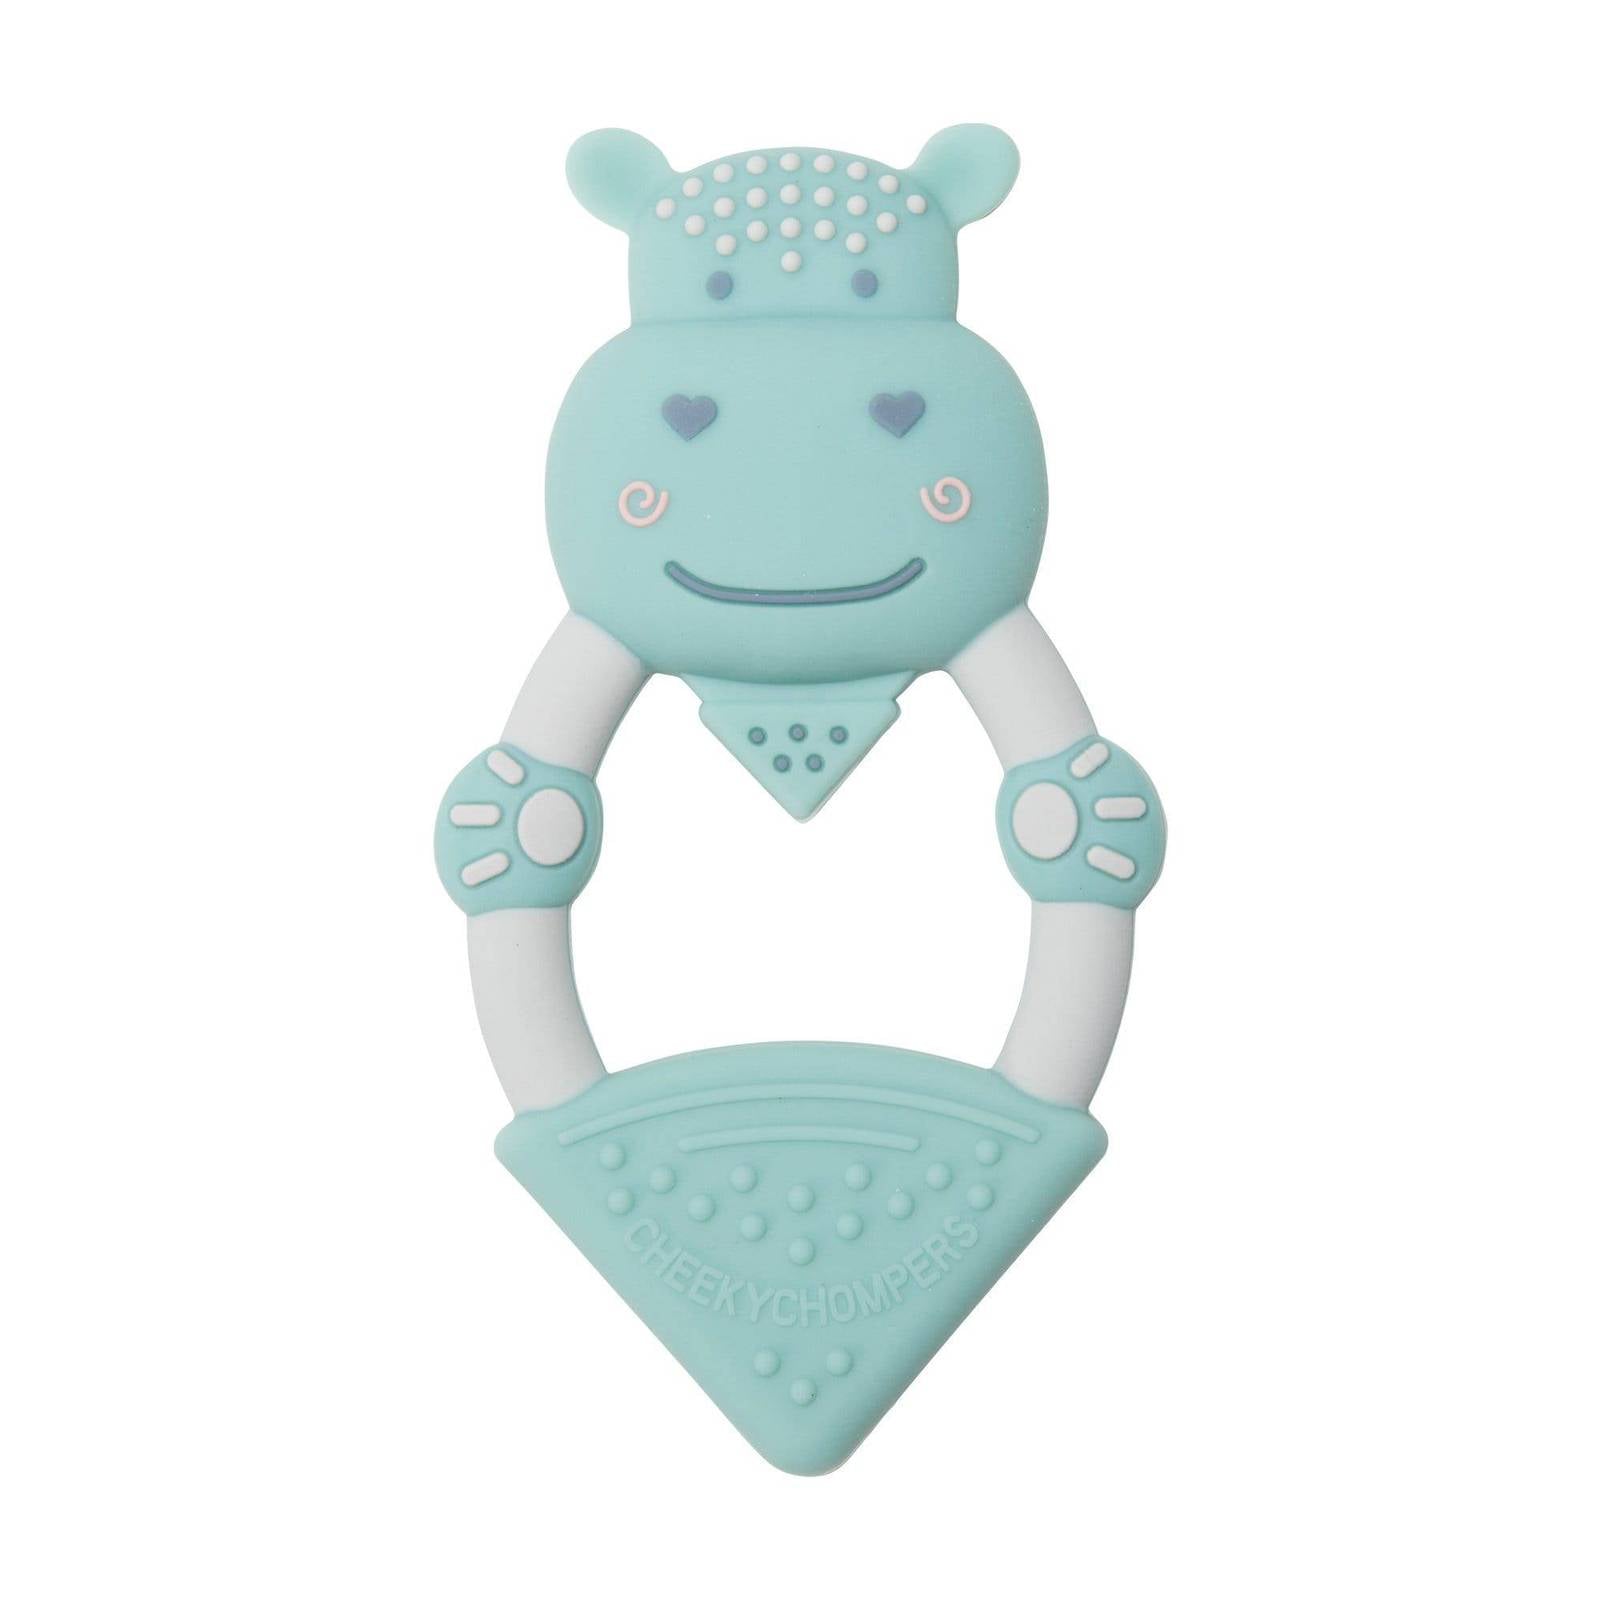 Baby teething toy in blue hippo design.